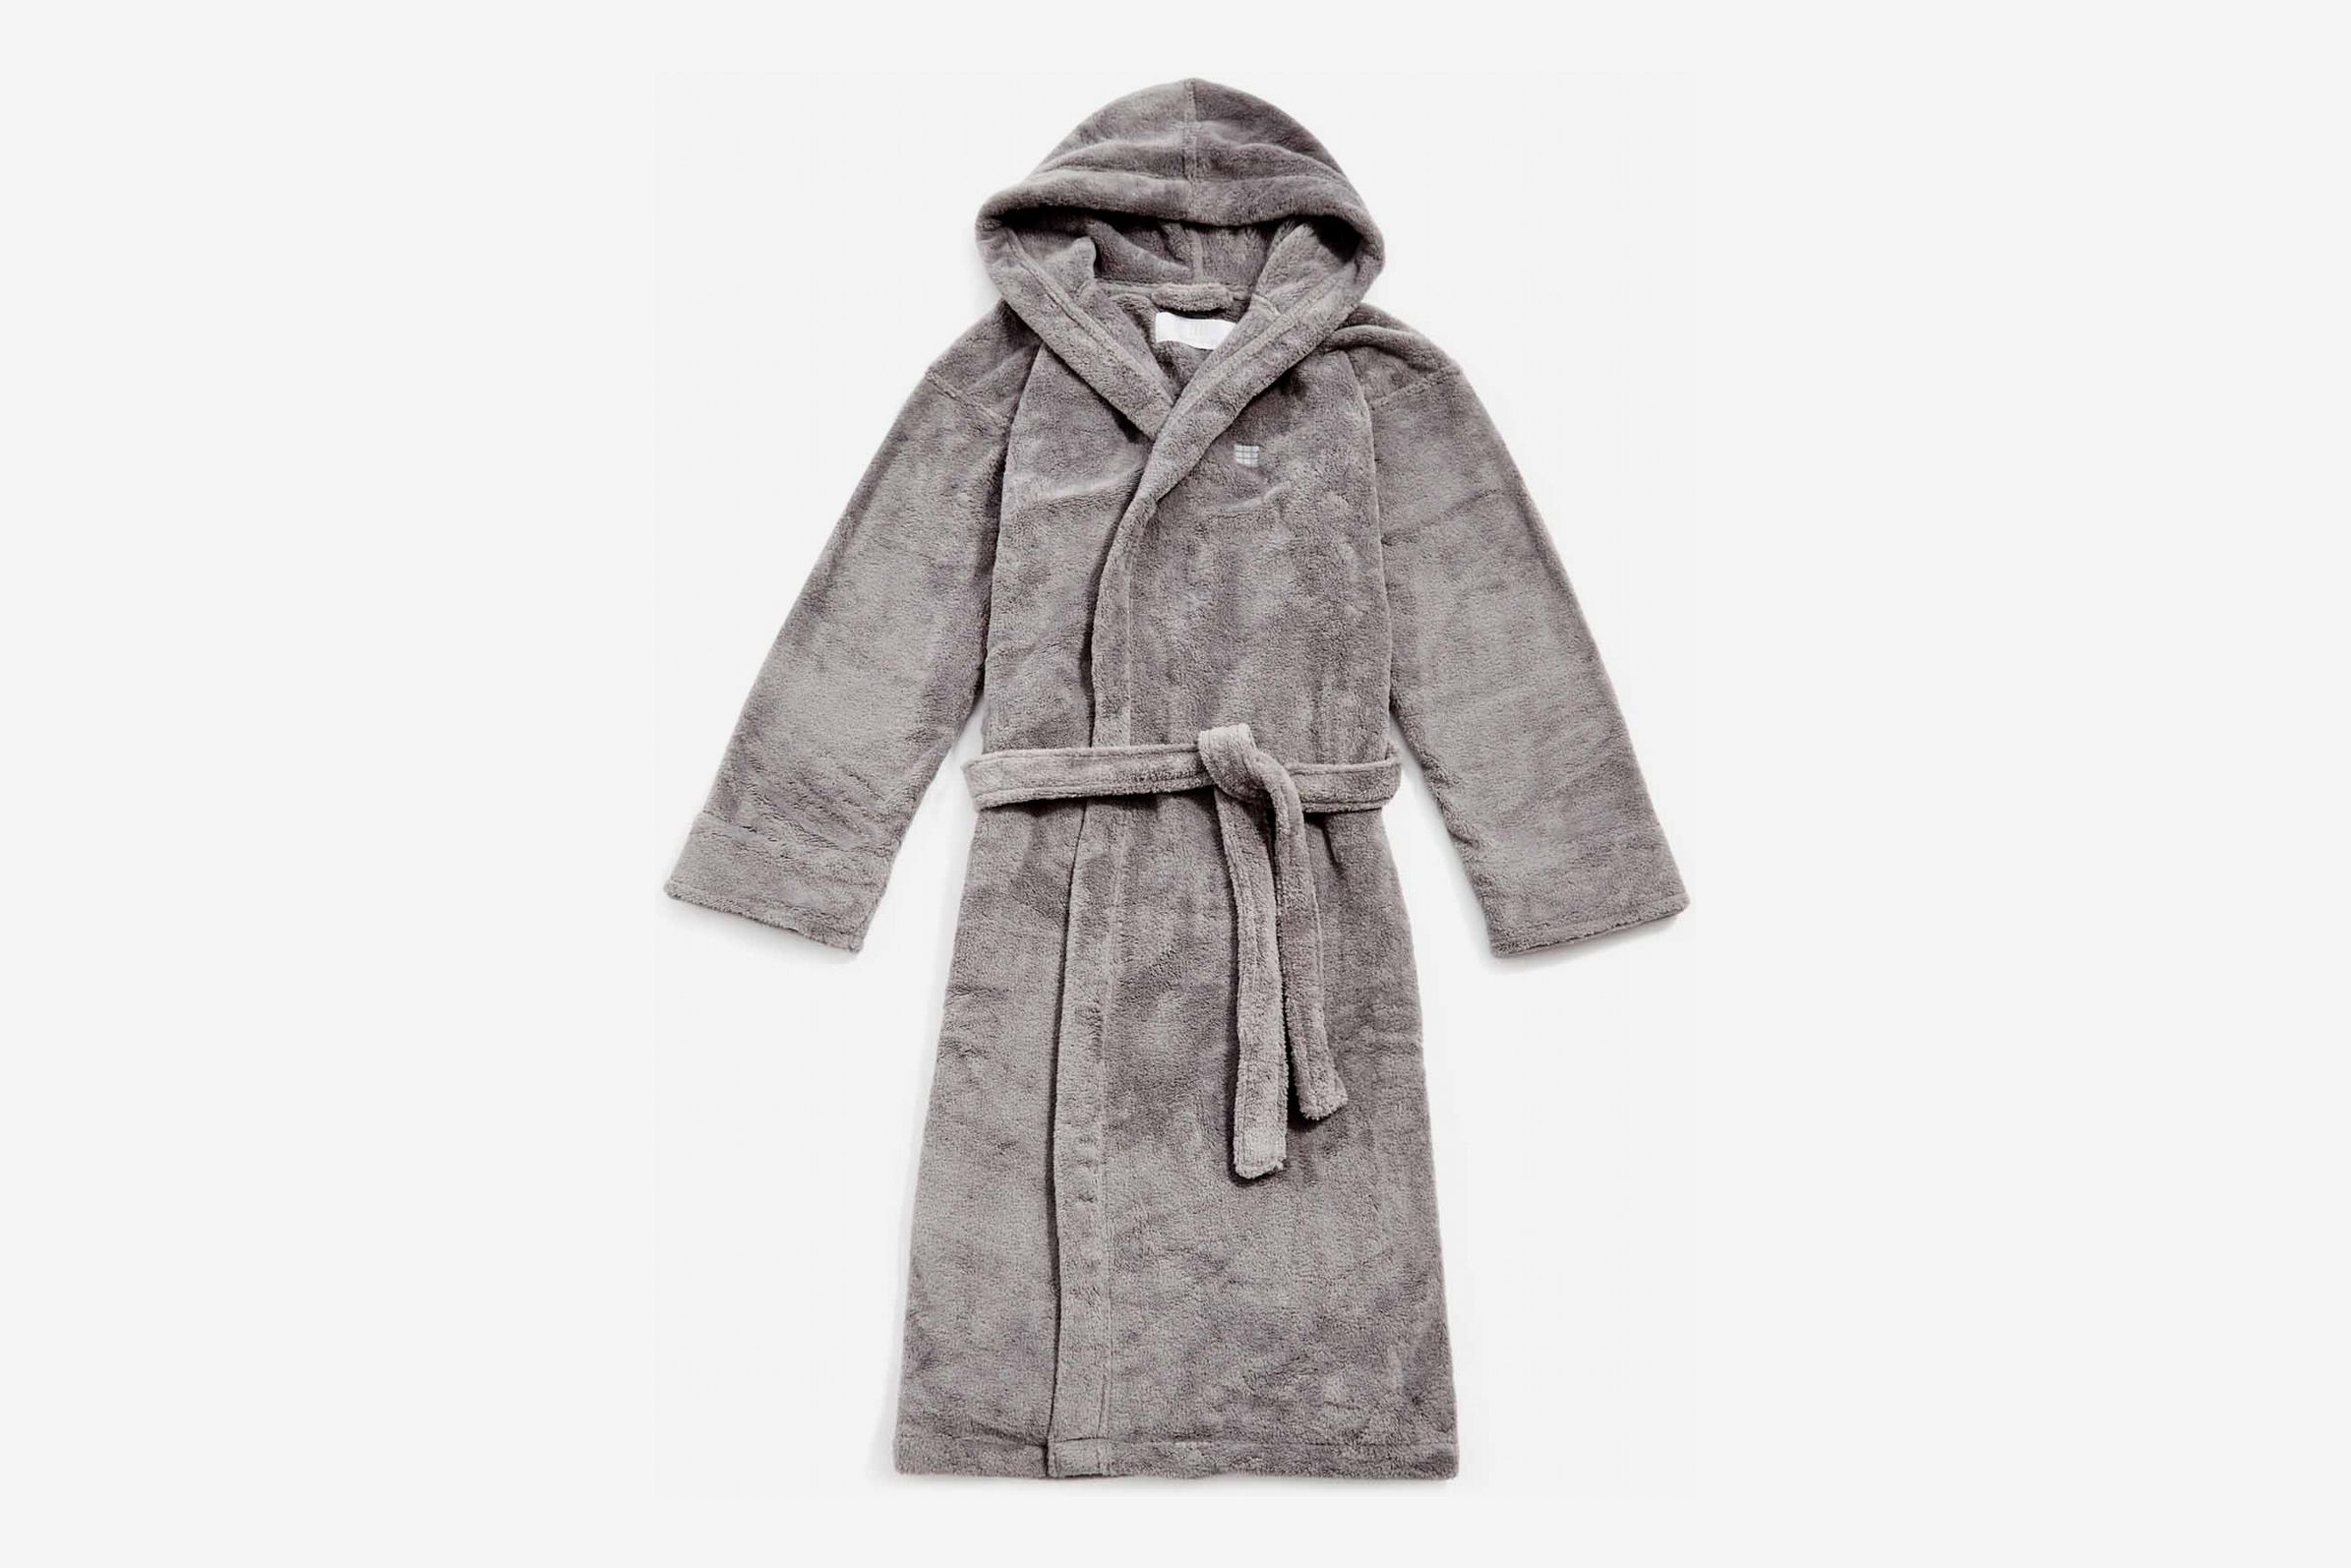 Here are 5 of the coziest bathrobes under $50 you'll want to lounge in  post-shower